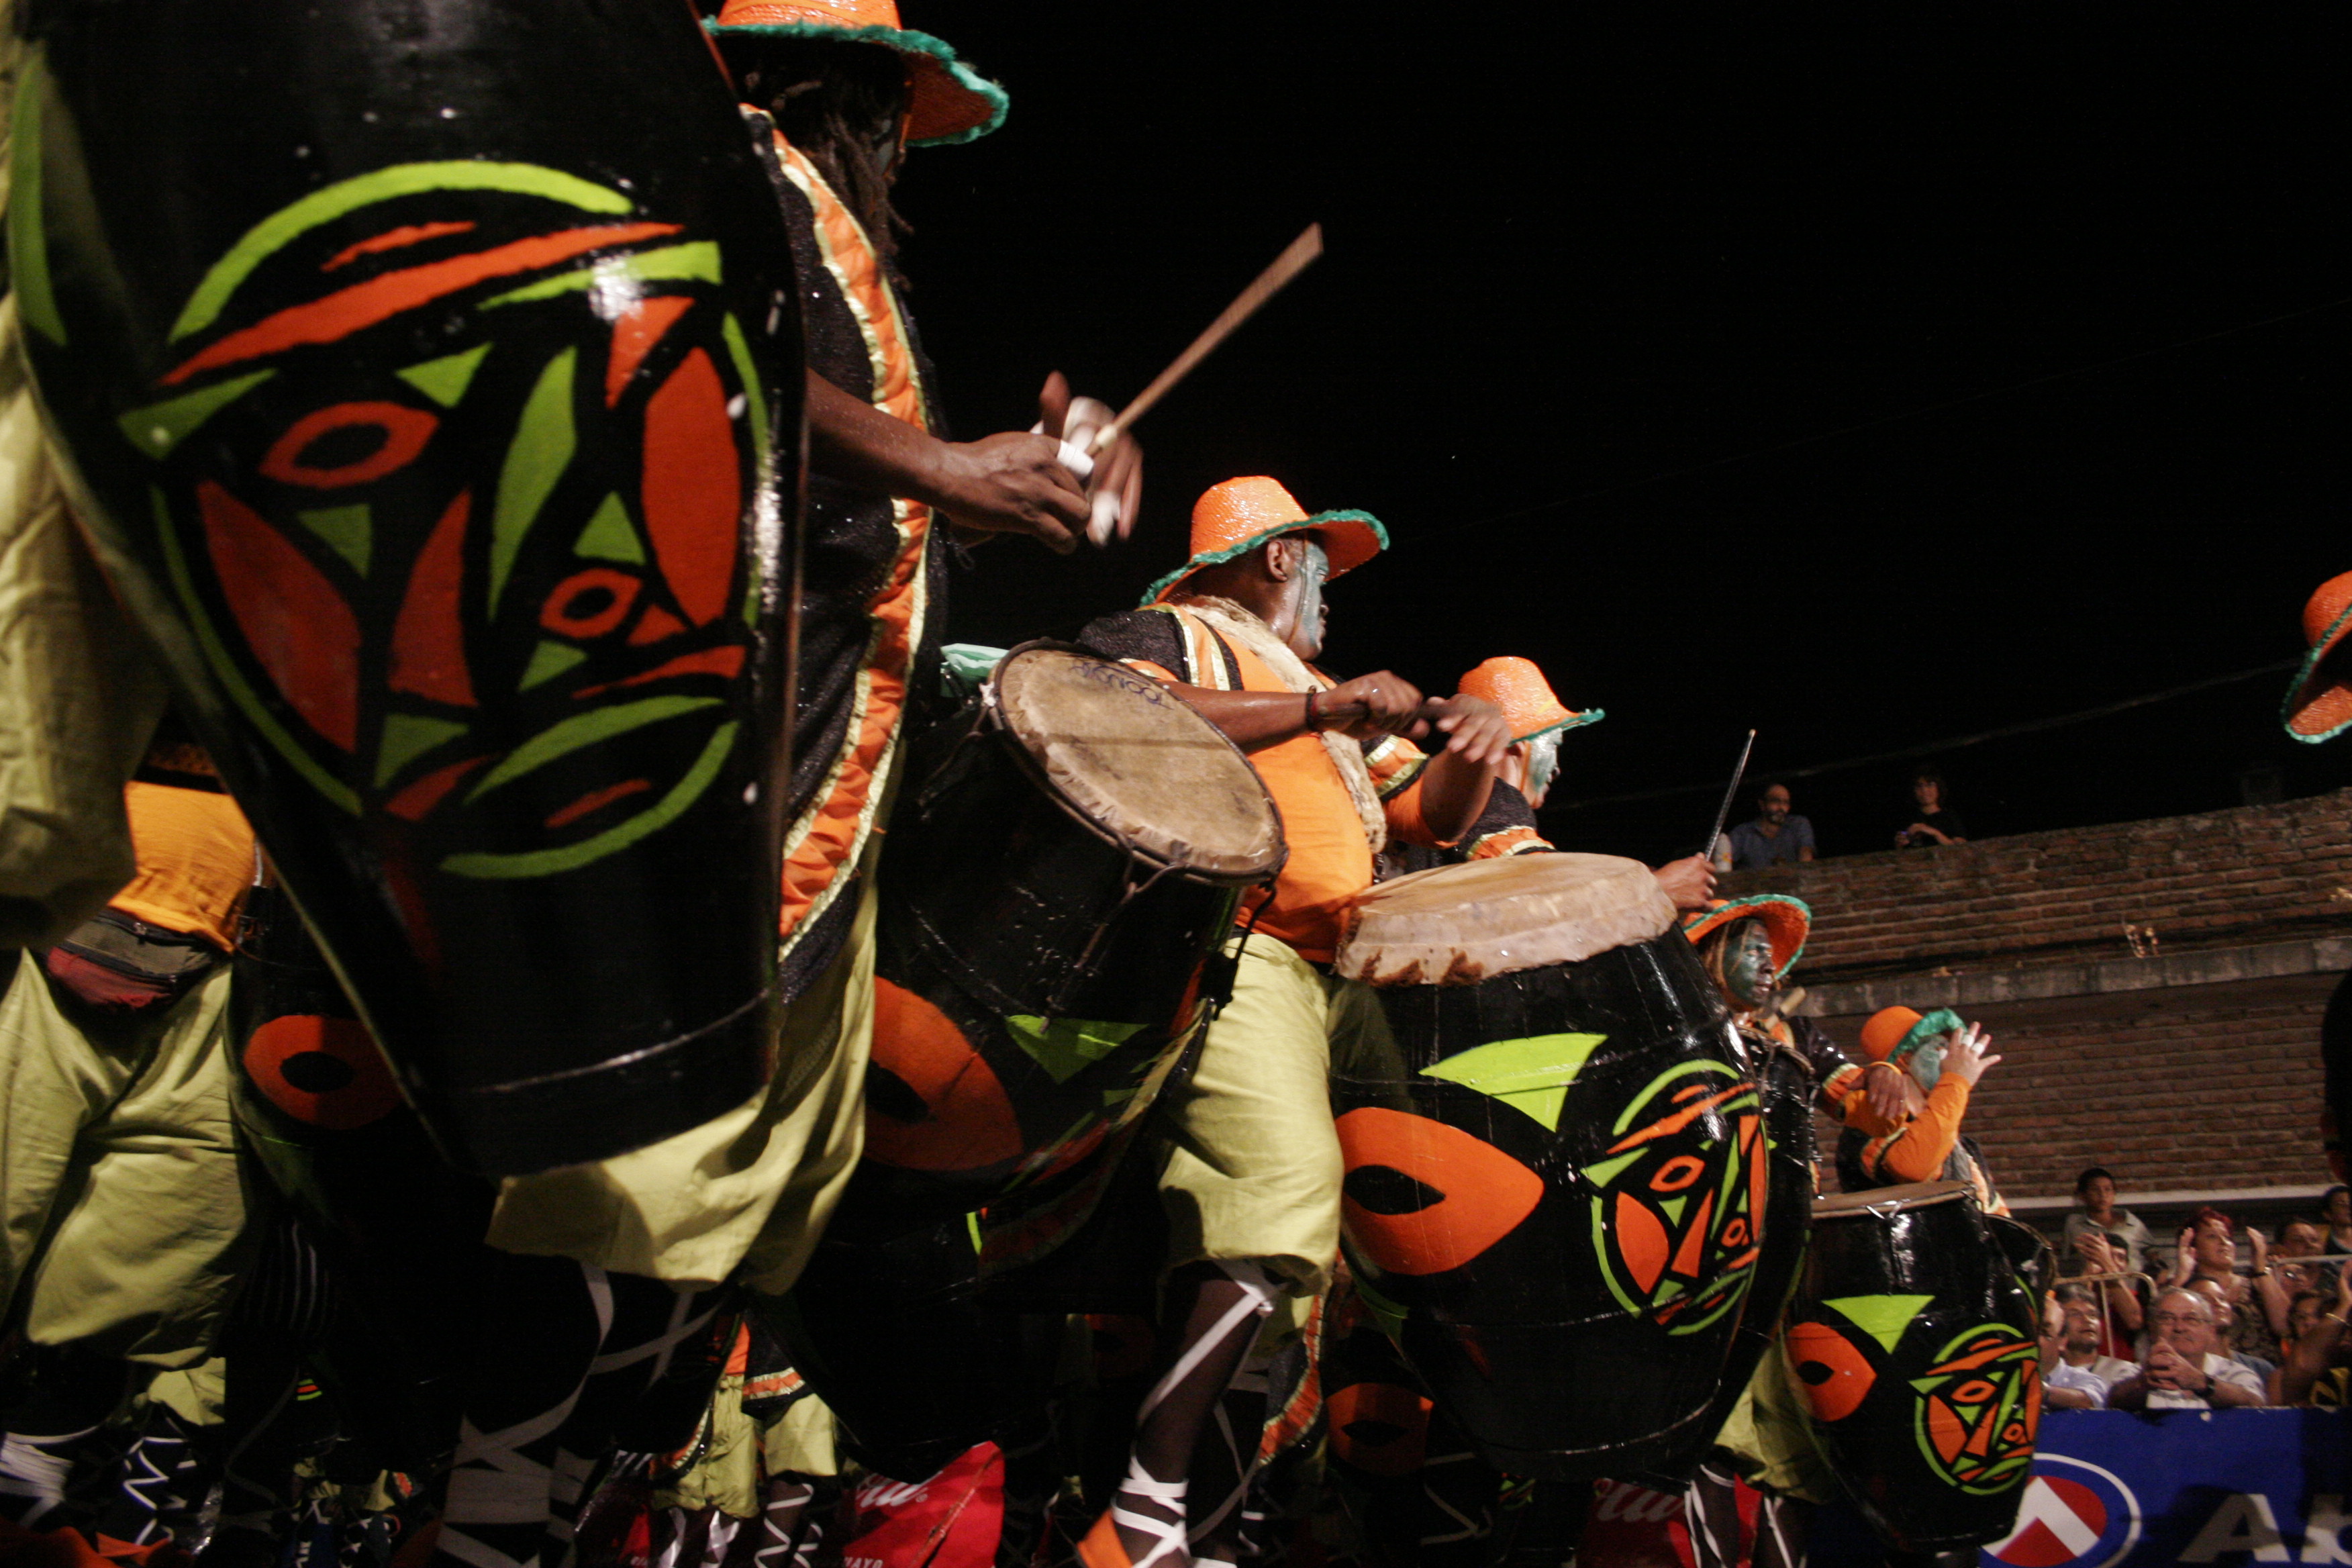 The Candombe and its social and cultural space: a community practice. Comparsa playing on the day of the calls. Photo: Rodrigo López-CPCN (Commission of Cultural Heritage of the Nation), 2011